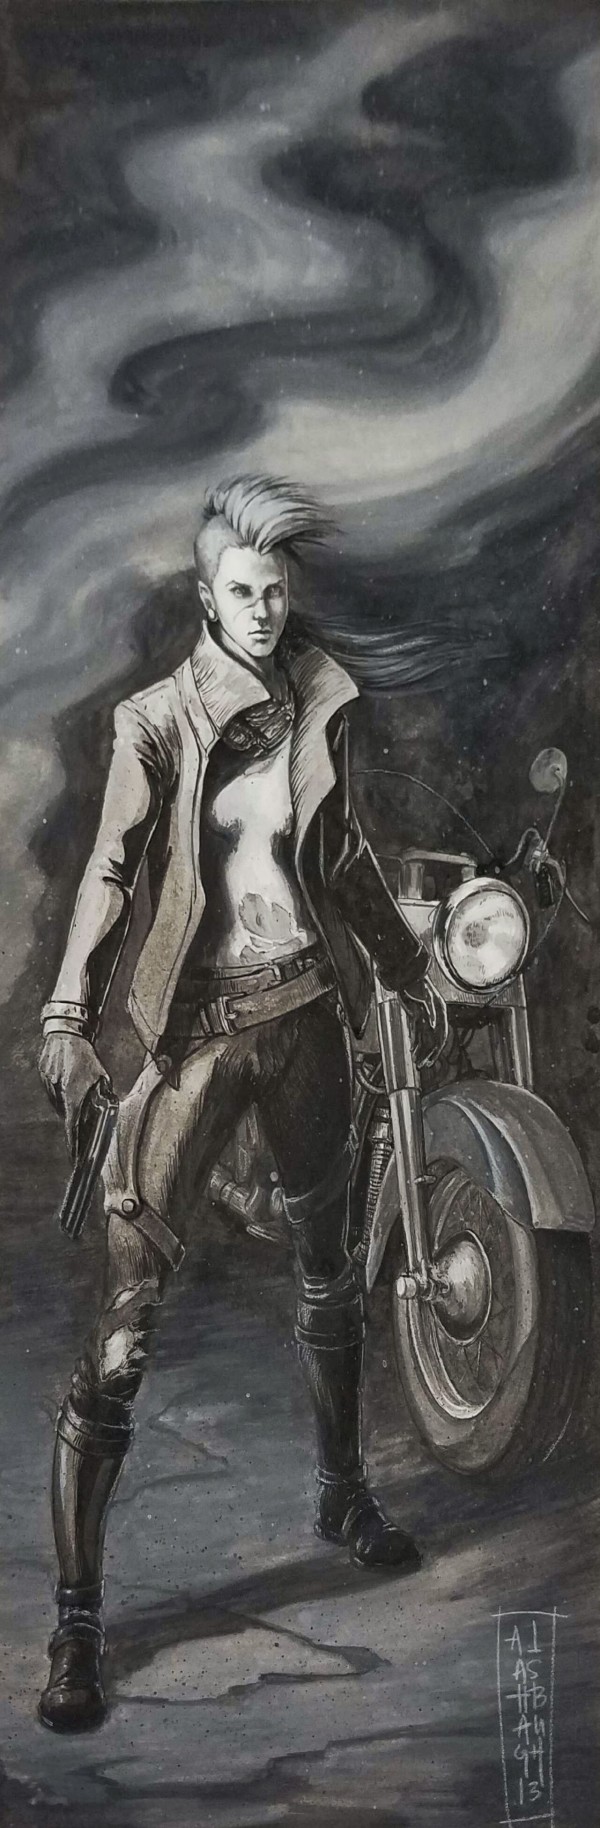 Woman and Motorcycle by Amy Ashbaugh